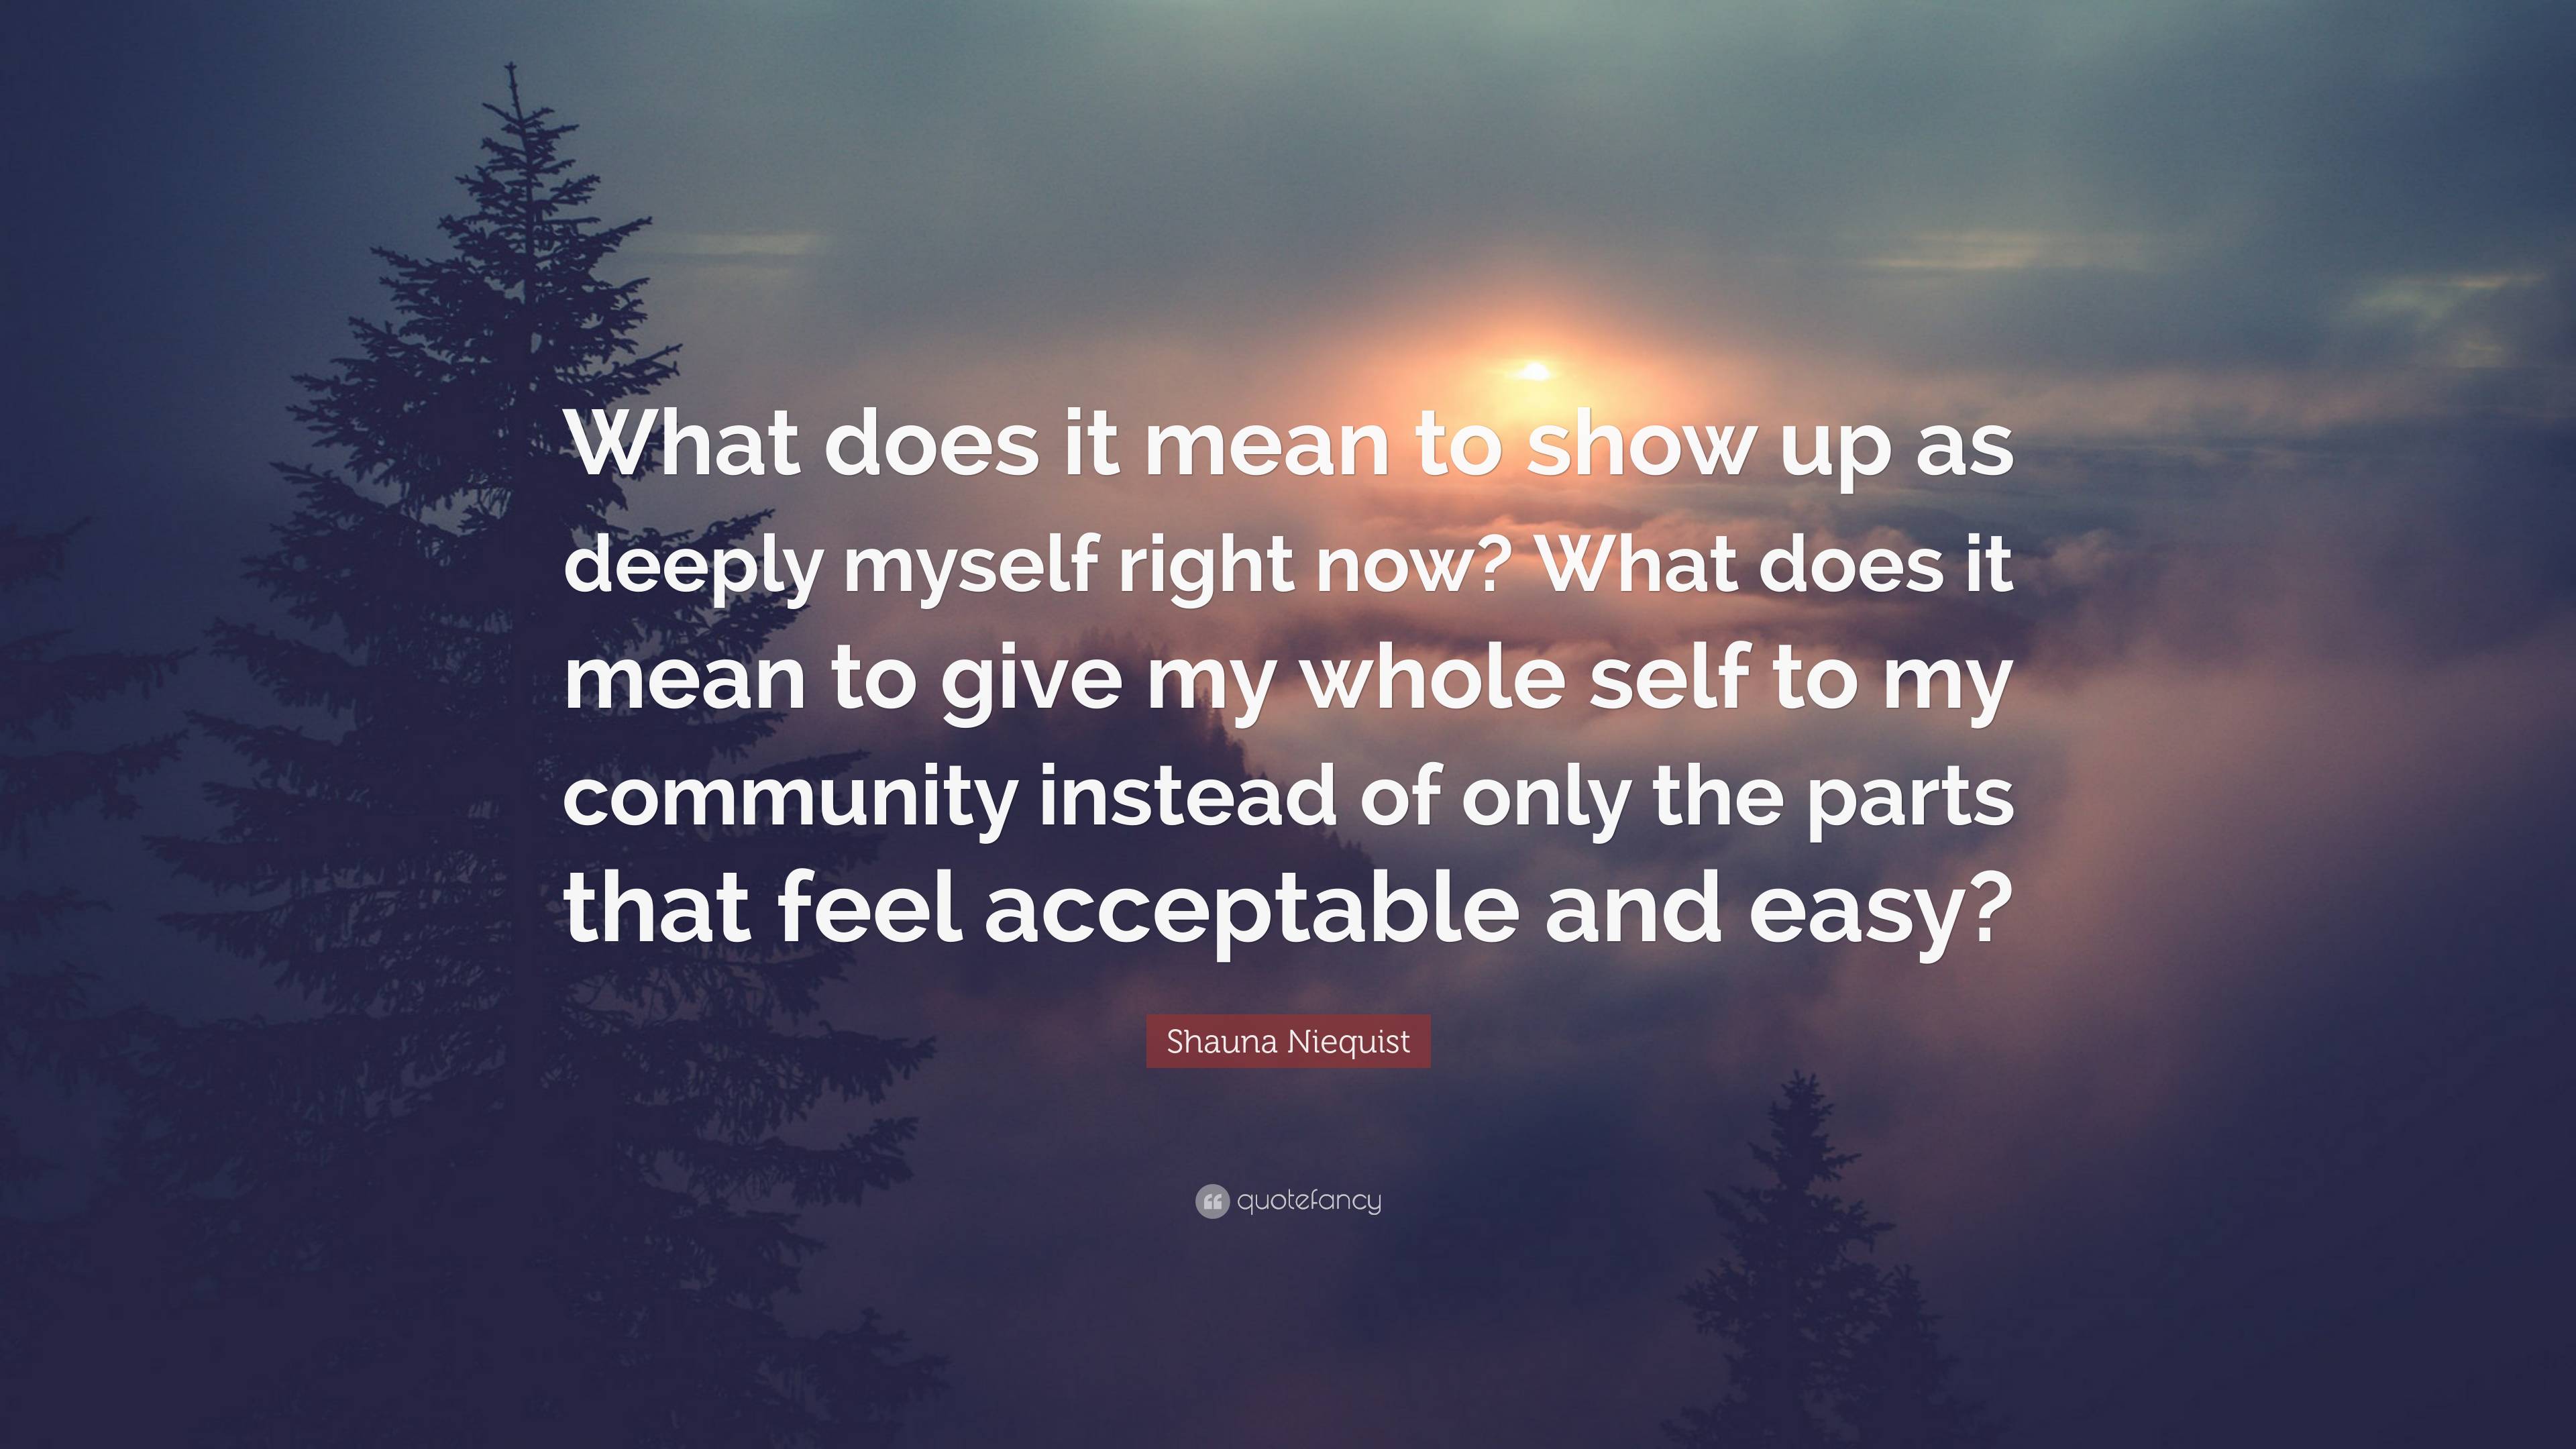 Shauna Niequist Quote: “What does it mean to show up as deeply myself ...